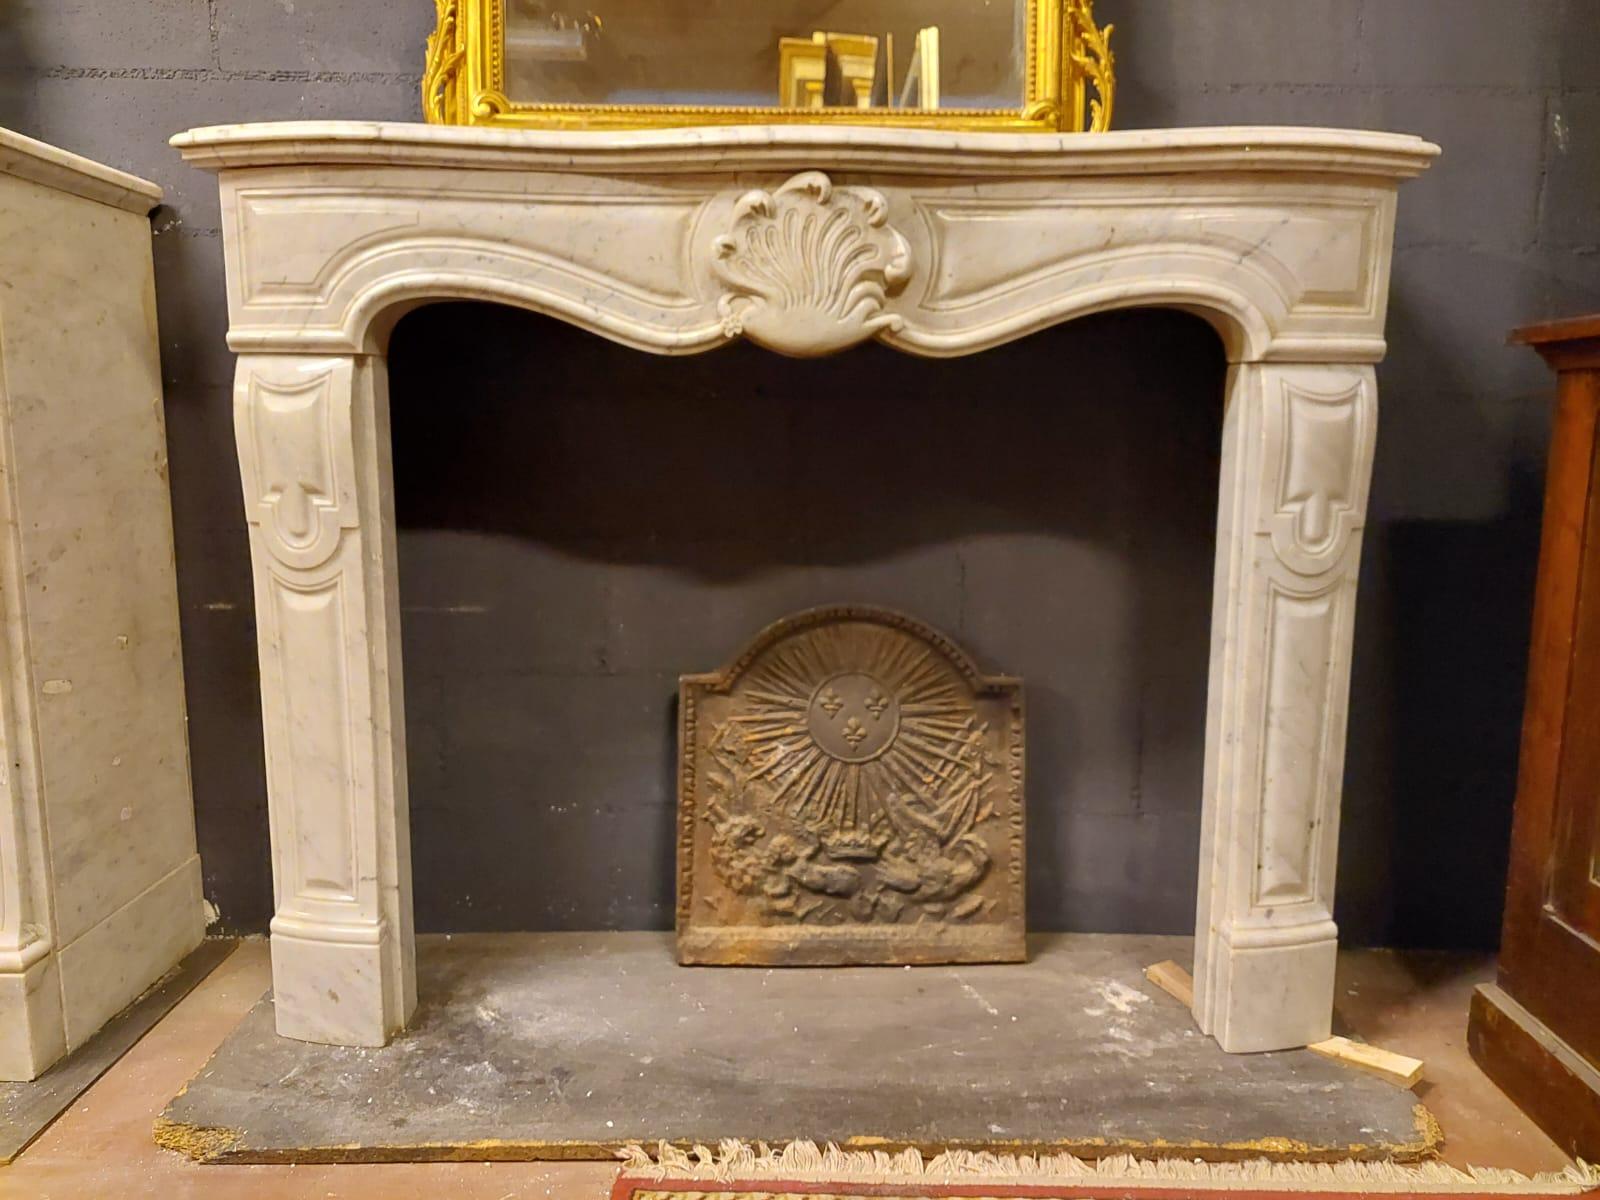 Ancient fireplace, mantle in precious white Carrara marble, hand-sculpted with central shell and wavy legs, built in France in the middle of the 18th century for a noble palace.
maximum external measurements cm w 138 x H 106 x d 36, internal mouth